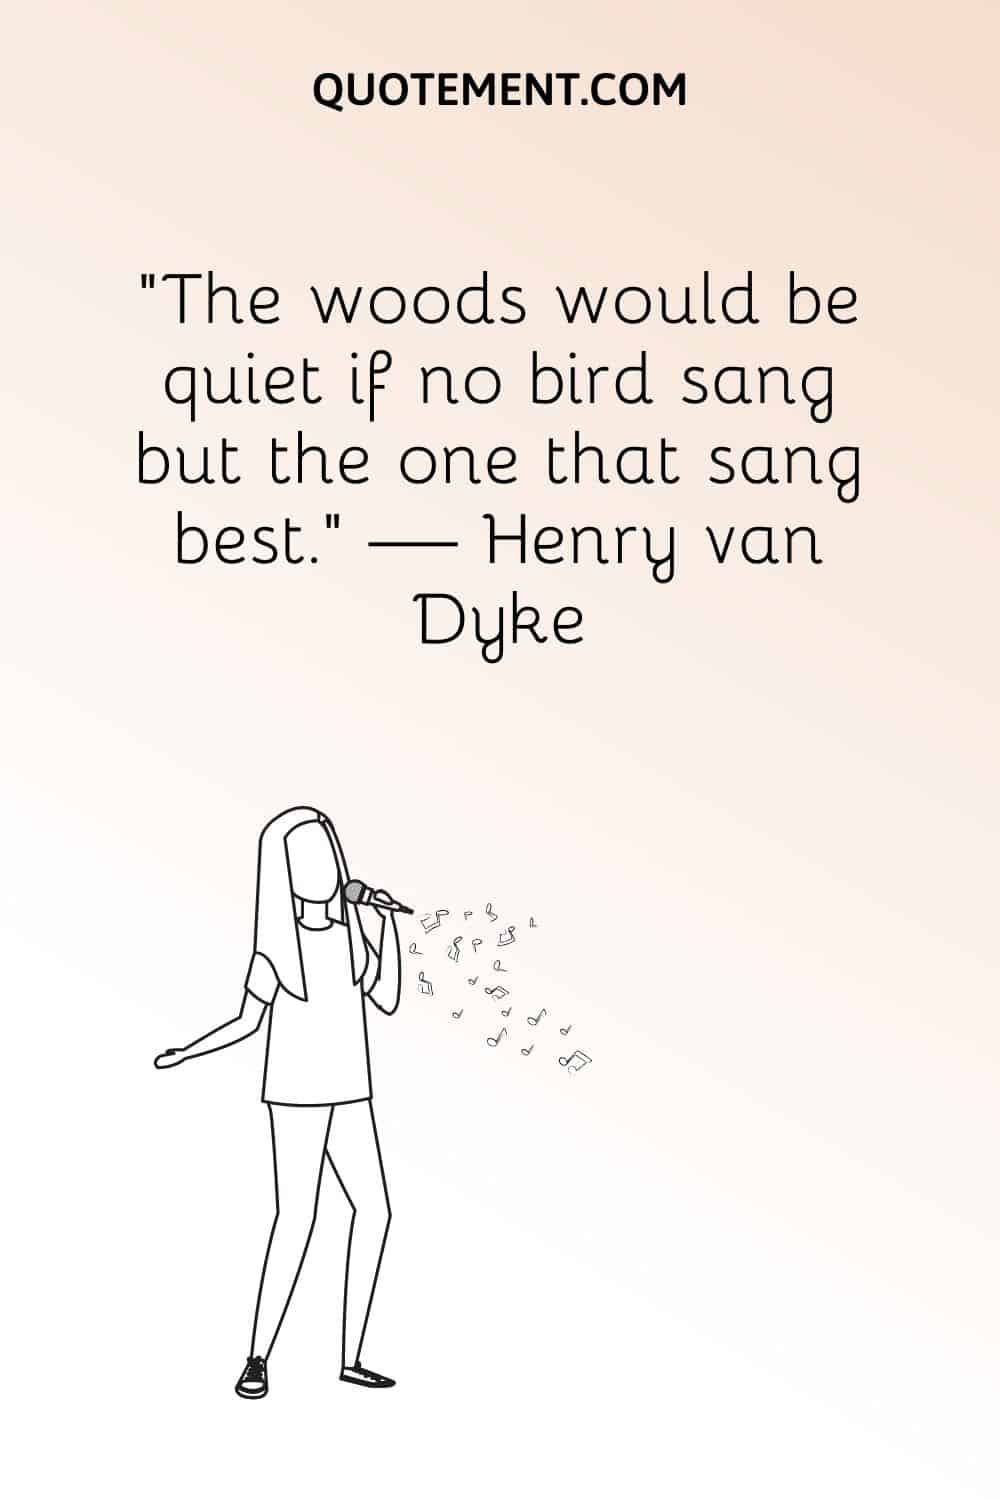 illustration of a woman singing representing singing quote